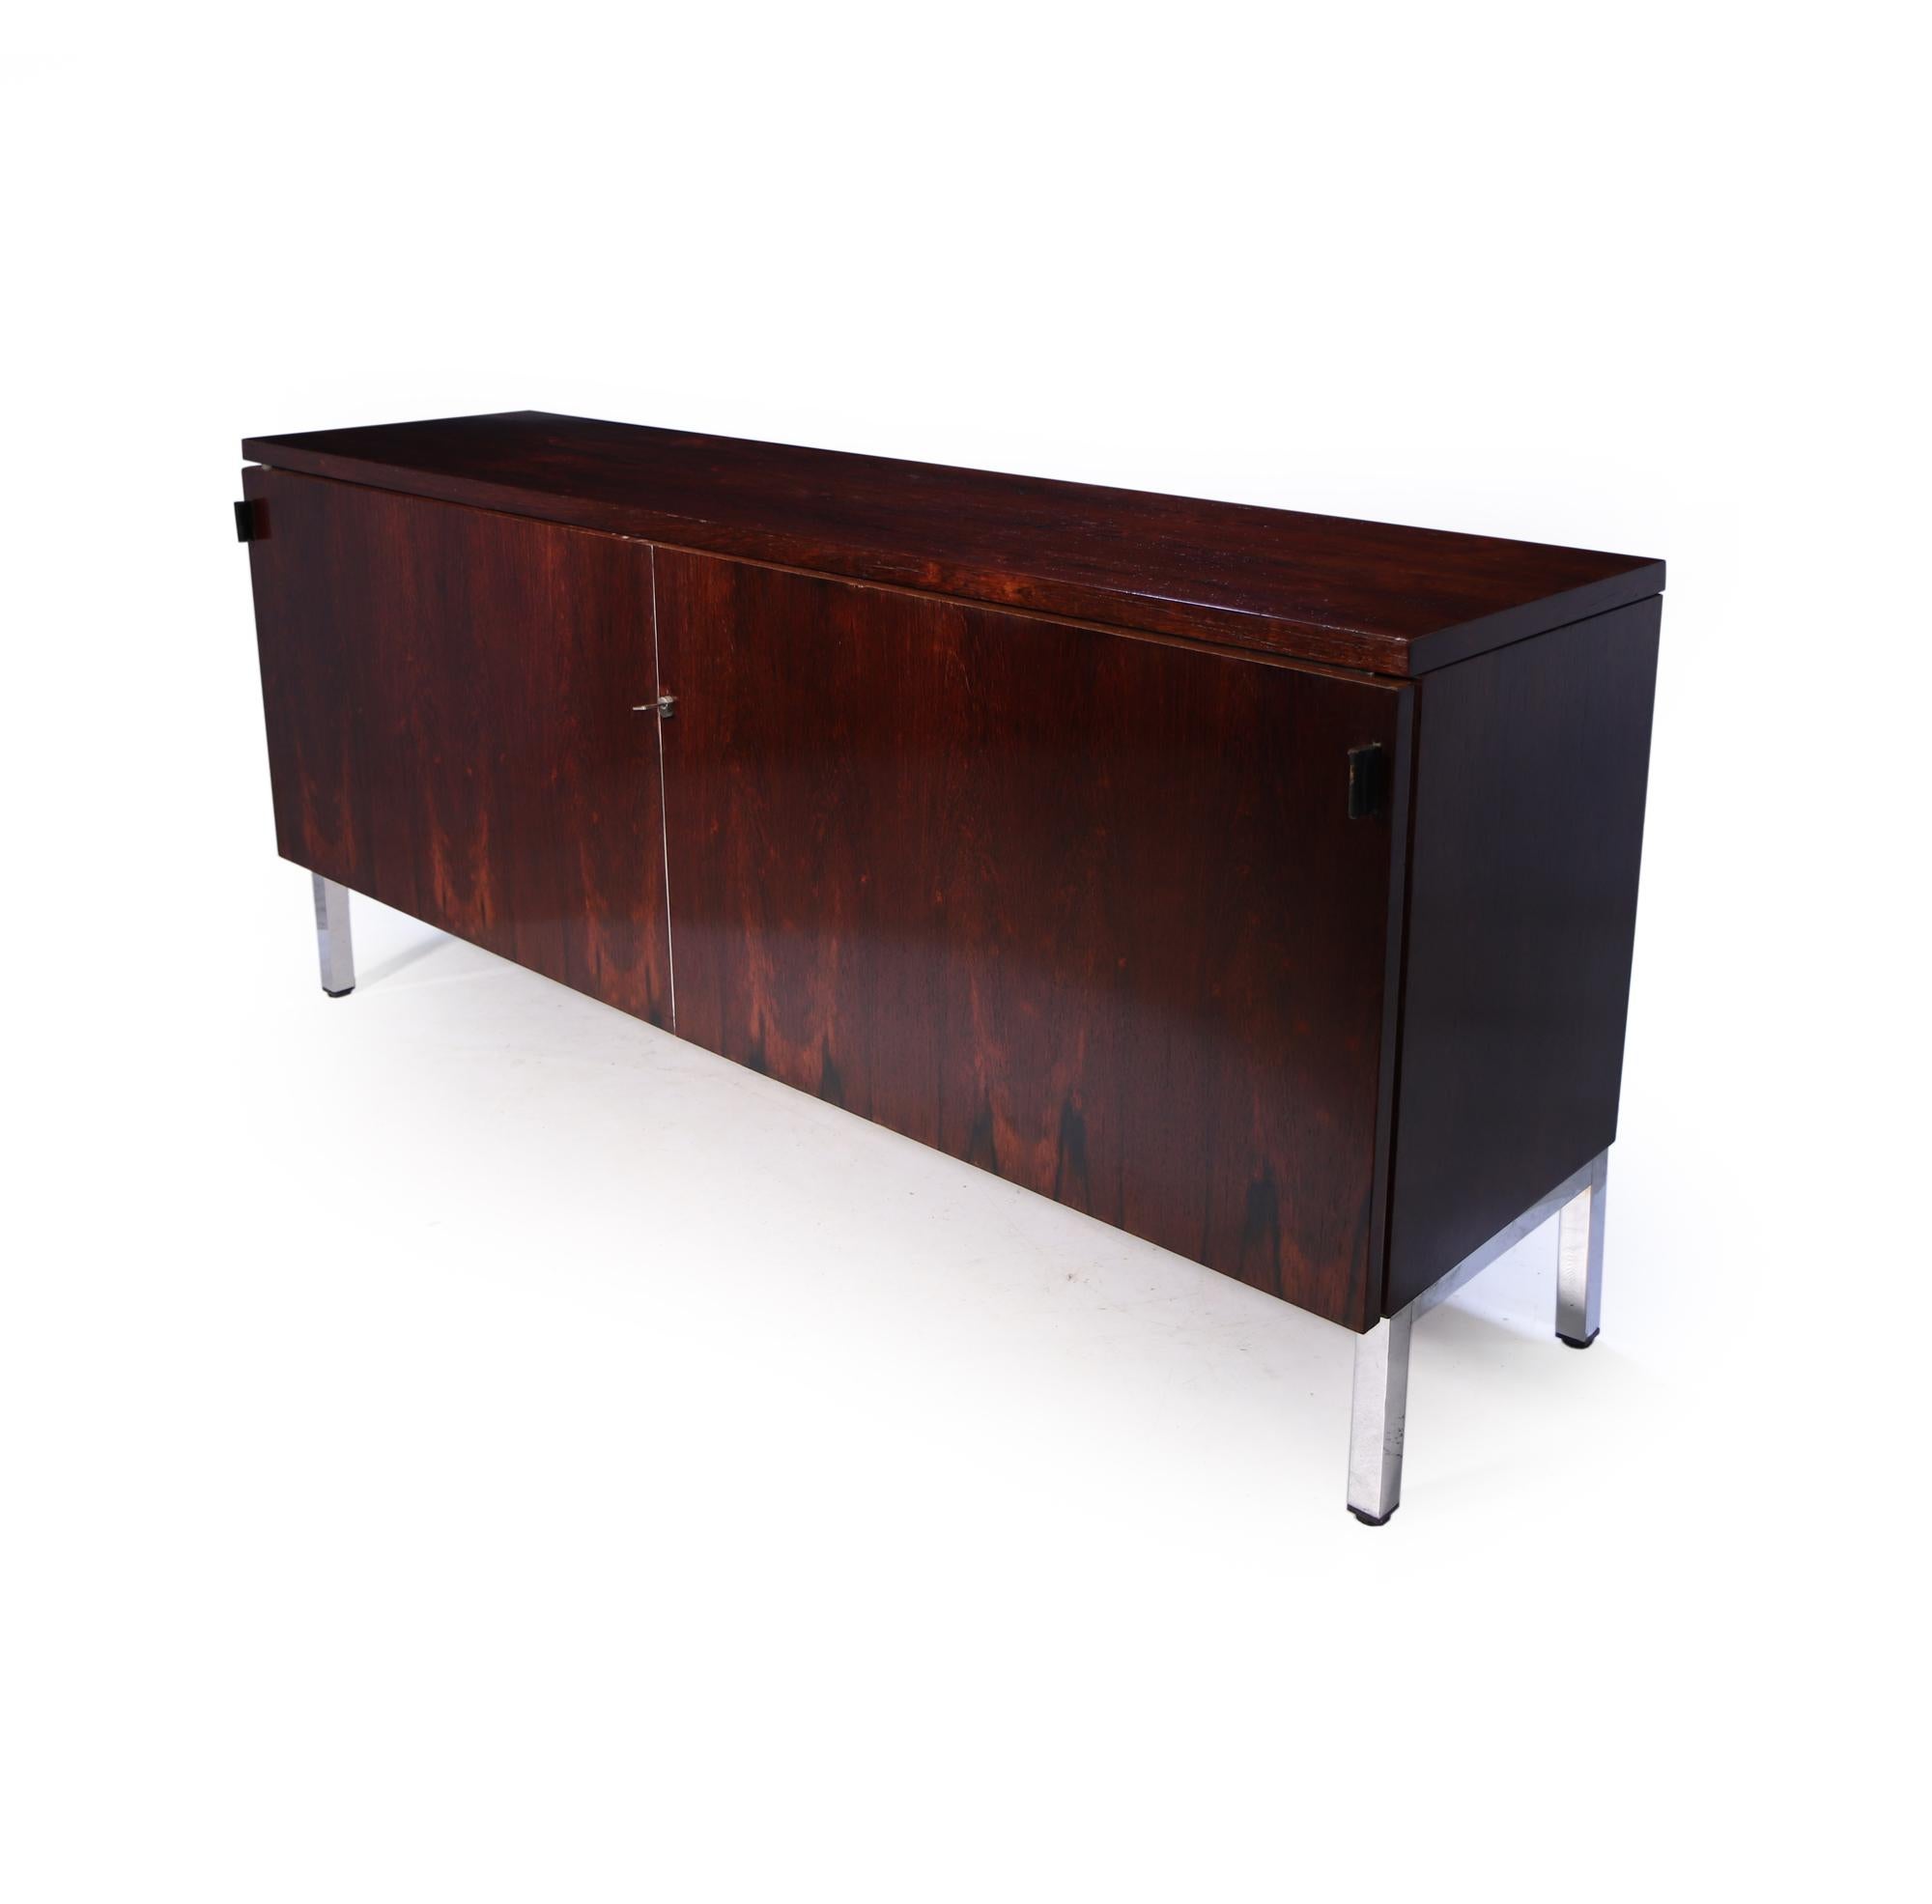 one of the most sought after iconic designs from the mid century modern era is this minimalist rosewood sideboard with two sliding doors with leather handles, and standing on a chrome base, two adjustable shelves, the sideboard has been fully